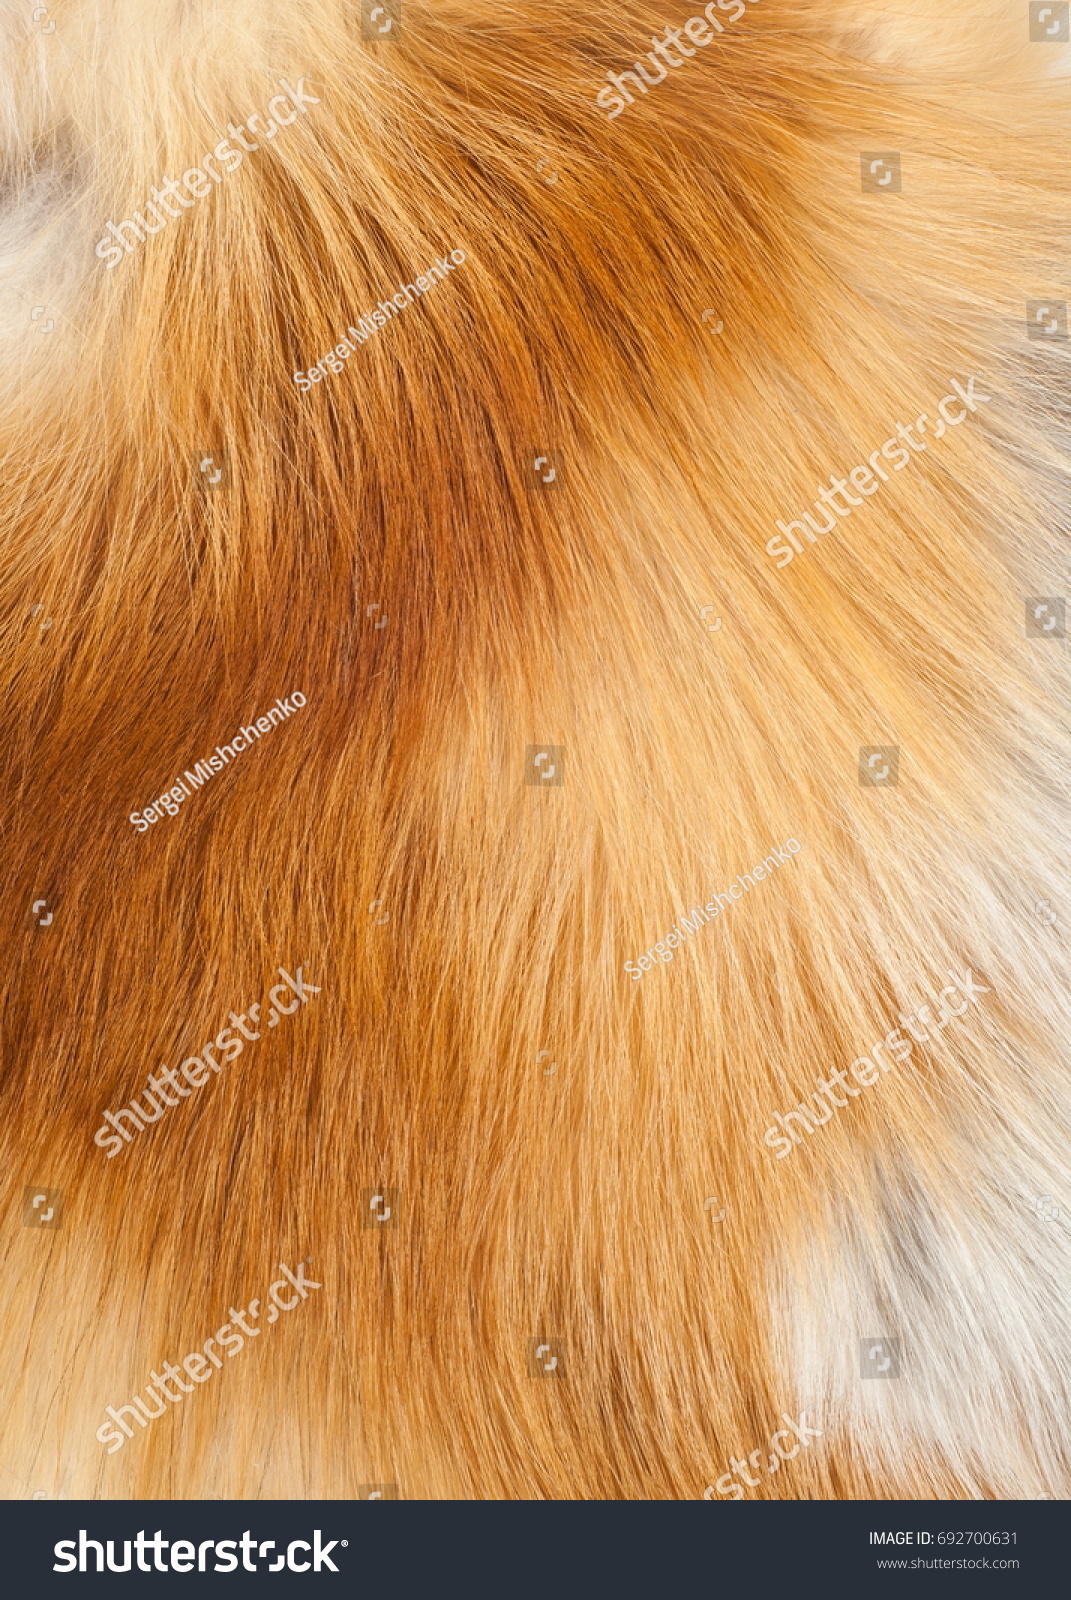 Textures red fox fur. Red fox shaggy fur texture cloth abstract, furry rusty texture plain surface, rough pelt background in horizontal orientation, nobody. #692700631